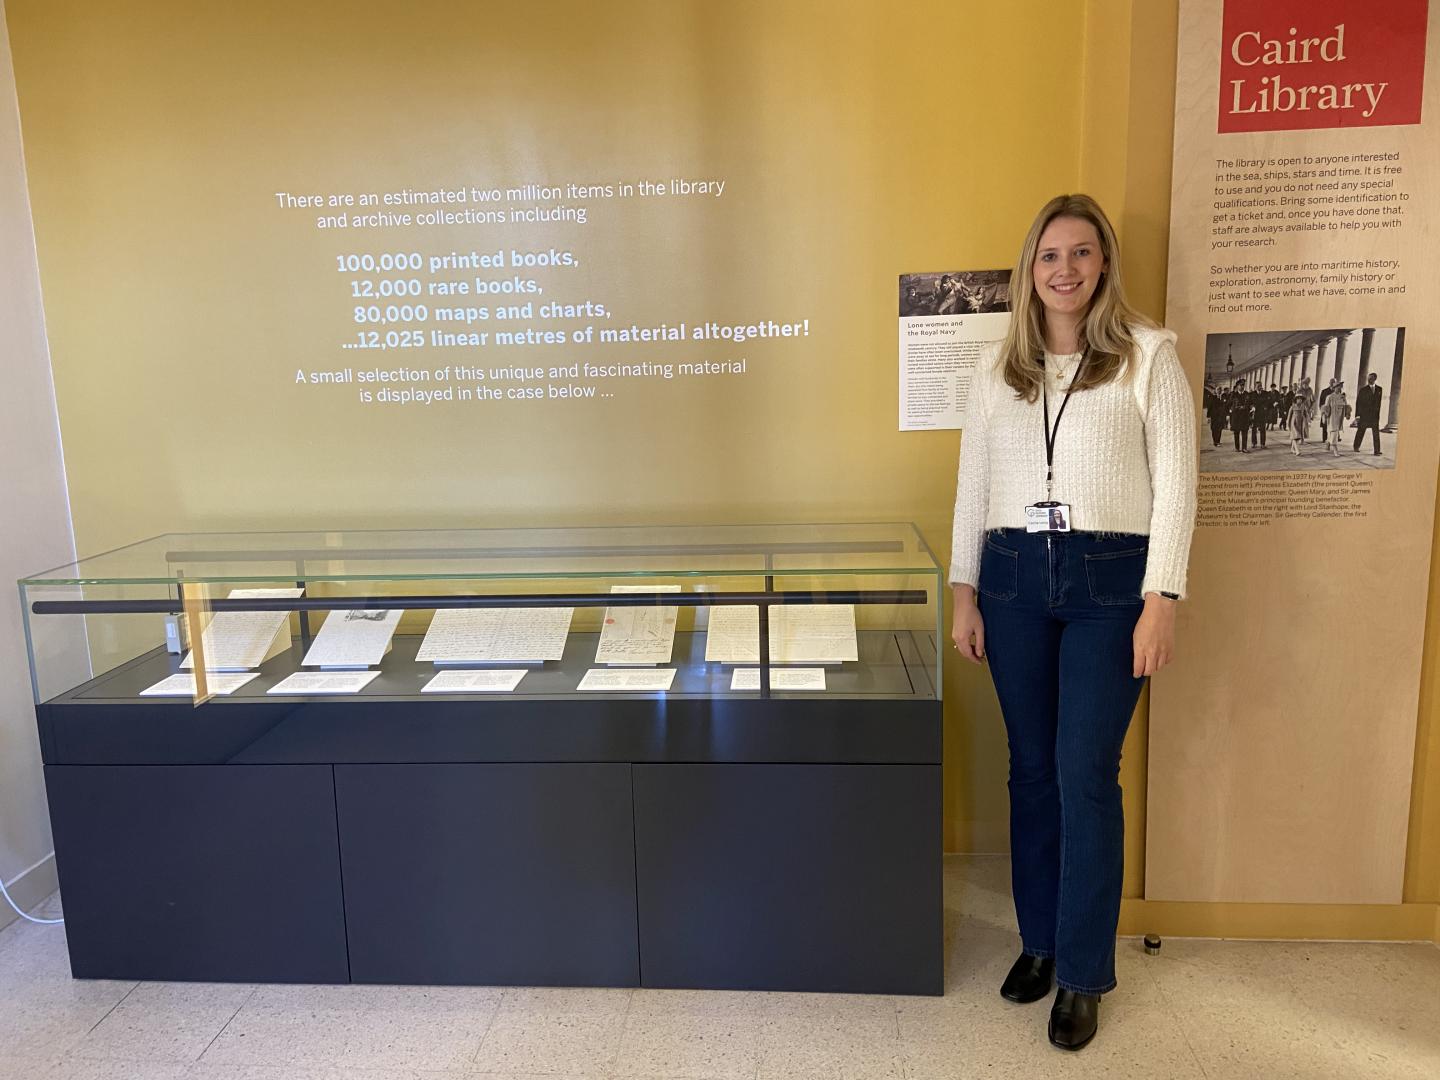 Carrie Long pictured by the Caird Library's display case